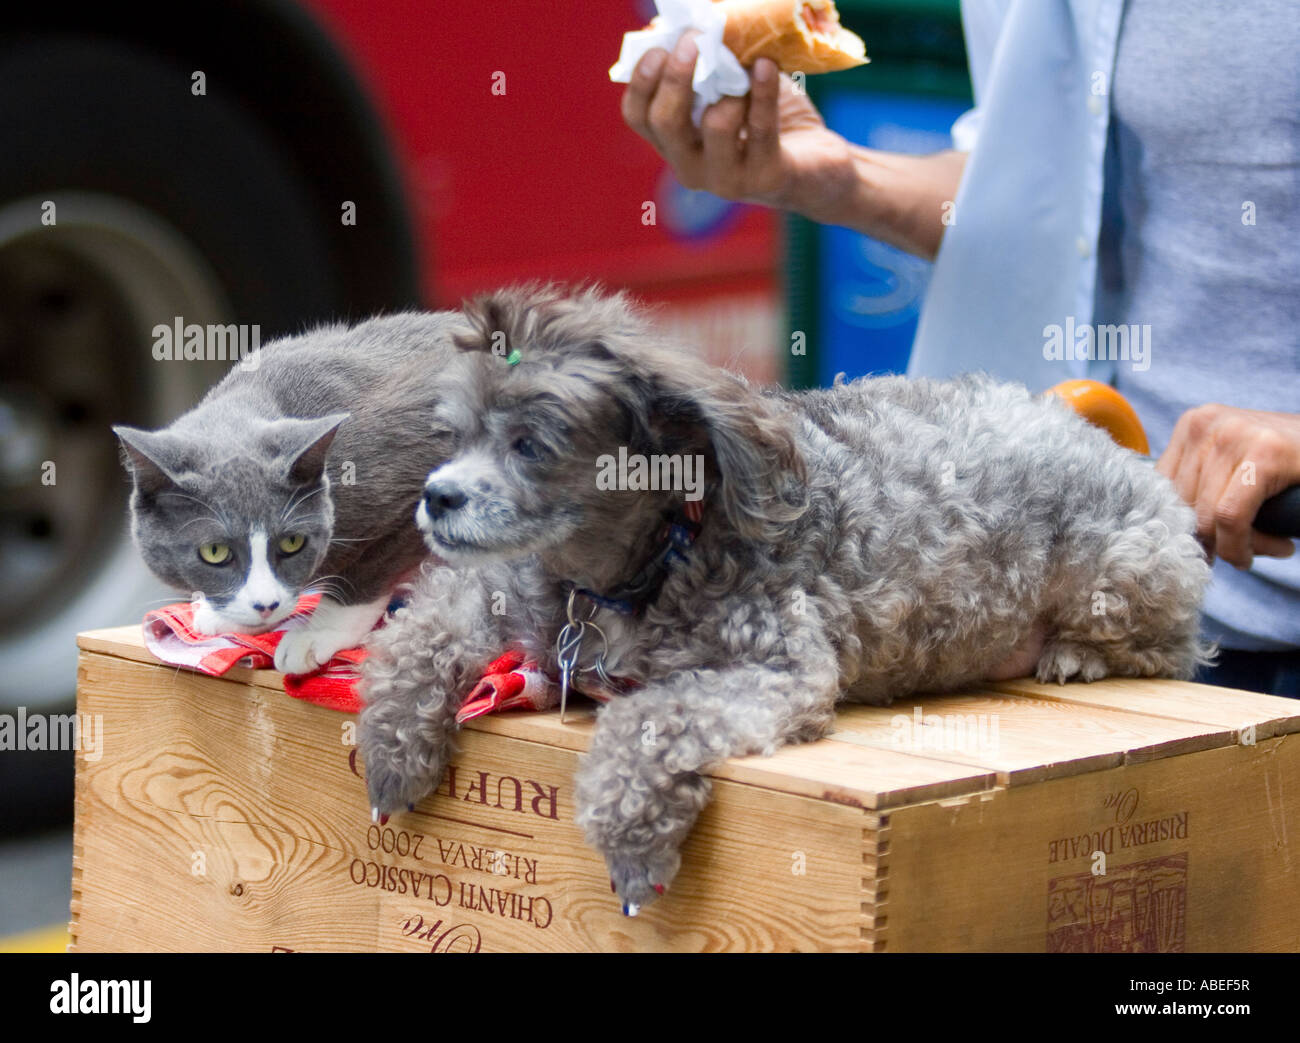 A dog and a cat are pushsed around the streets of Times Square on a cart. Stock Photo